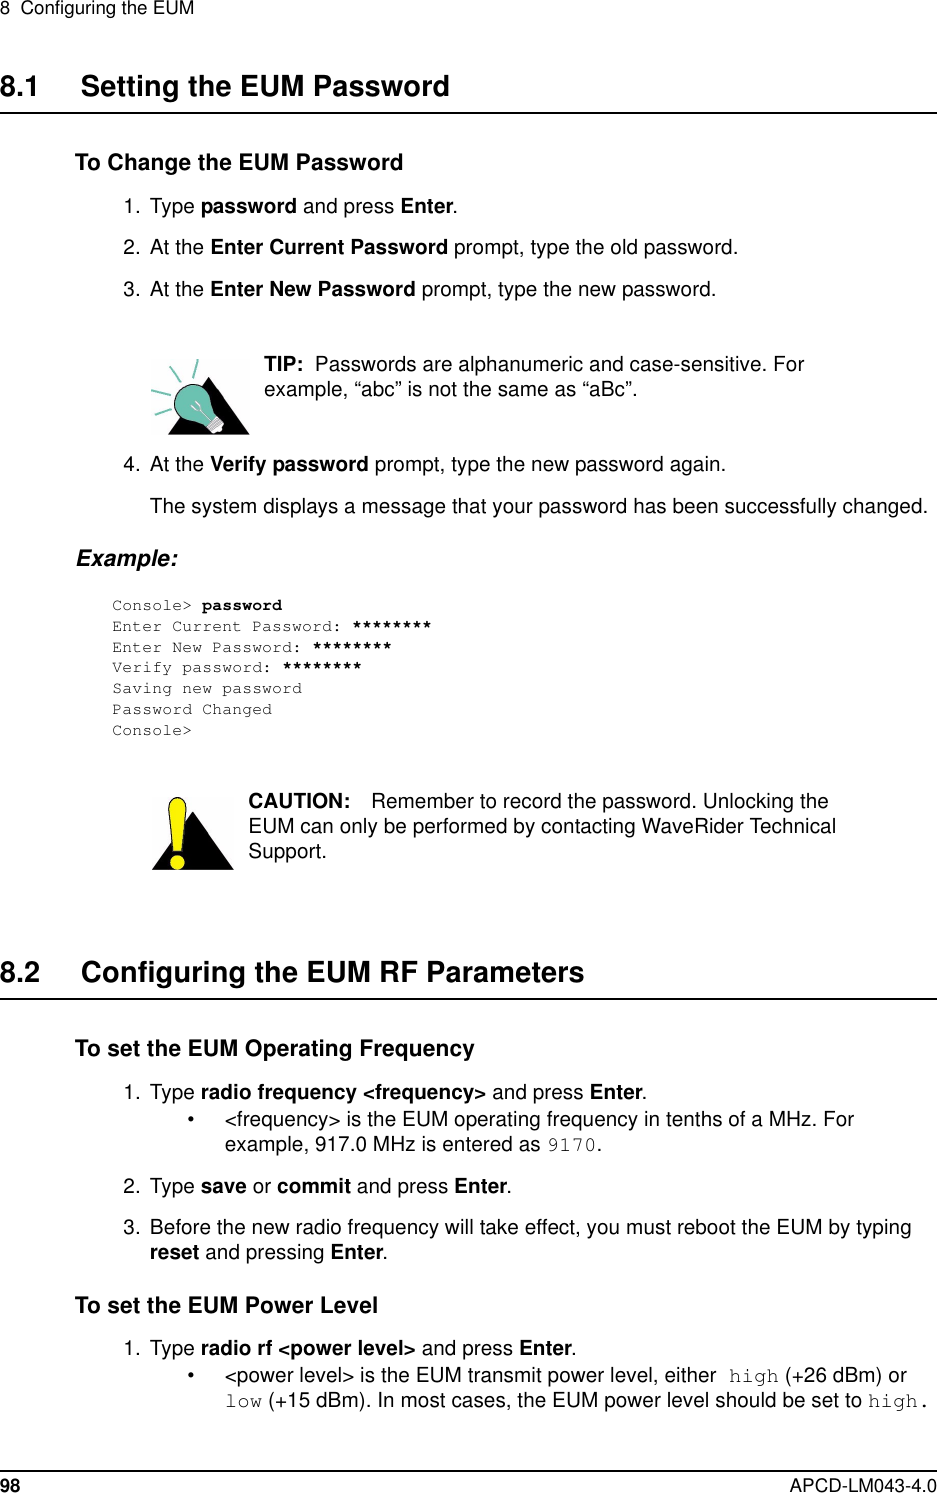 8 Configuring the EUM98 APCD-LM043-4.08.1 Setting the EUM PasswordTo Change the EUM Password1. Type password and press Enter.2. At the Enter Current Password prompt, type the old password.3. At the Enter New Password prompt, type the new password.TIP: Passwords are alphanumeric and case-sensitive. Forexample, “abc” is not the same as “aBc”.4. At the Verify password prompt, type the new password again.The system displays a message that your password has been successfully changed.Example:Console&gt; passwordEnter Current Password: ********Enter New Password: ********Verify password: ********Saving new passwordPassword ChangedConsole&gt;CAUTION: Remember to record the password. Unlocking theEUM can only be performed by contacting WaveRider TechnicalSupport.8.2 Configuring the EUM RF ParametersTo set the EUM Operating Frequency1. Type radio frequency &lt;frequency&gt; and press Enter.• &lt;frequency&gt; is the EUM operating frequency in tenths of a MHz. Forexample, 917.0 MHz is entered as 9170.2. Type save or commit and press Enter.3. Before the new radio frequency will take effect, you must reboot the EUM by typingreset and pressing Enter.To set the EUM Power Level1. Type radio rf &lt;power level&gt; and press Enter.• &lt;power level&gt; is the EUM transmit power level, either high (+26 dBm) orlow (+15 dBm). In most cases, the EUM power level should be set to high.